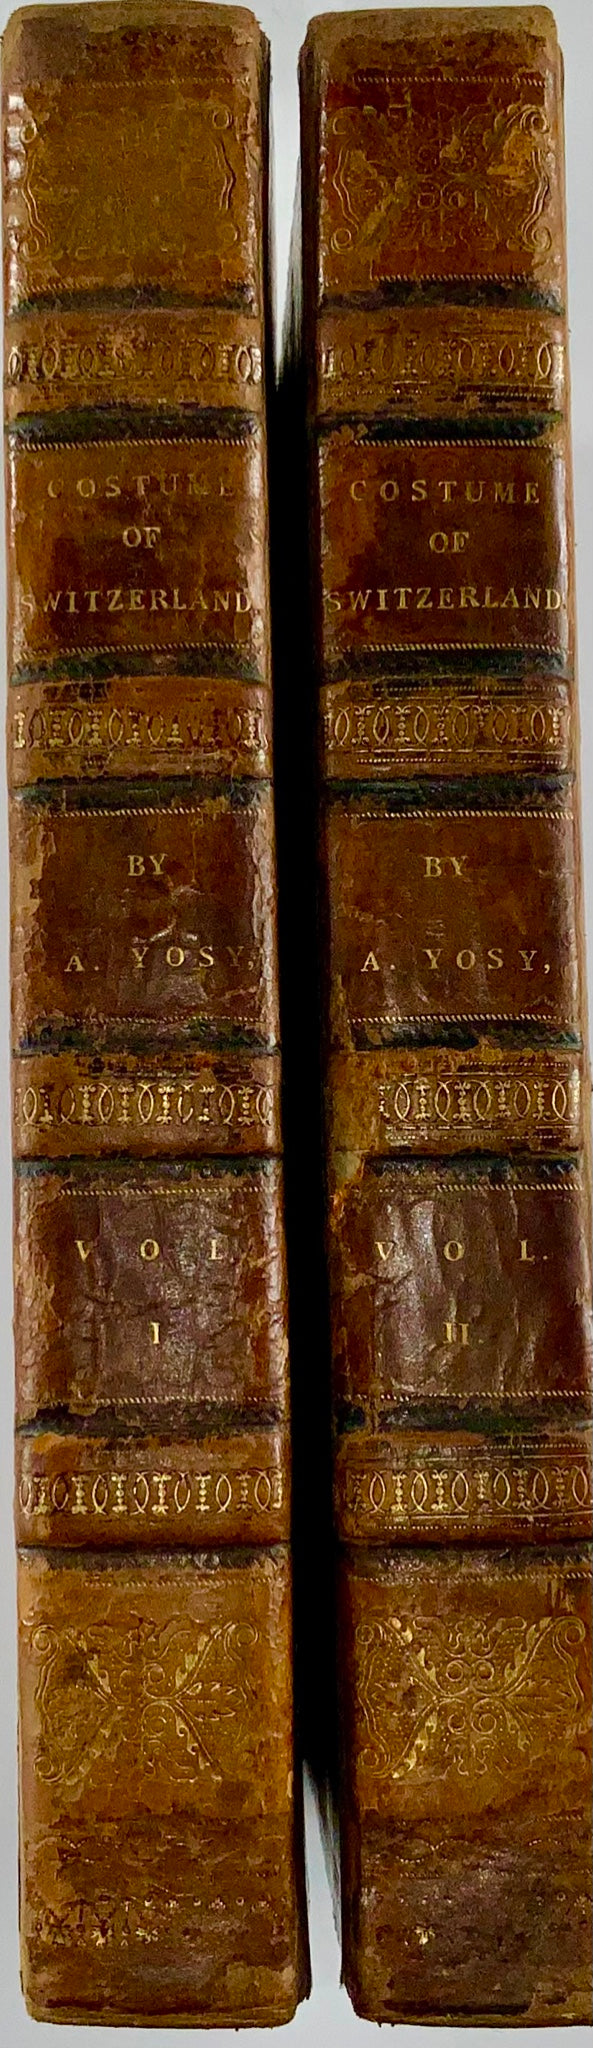 1815 Anne YOSY - Costumes and Trades of Switzerland 2 vols. 50 col. Plts. Book